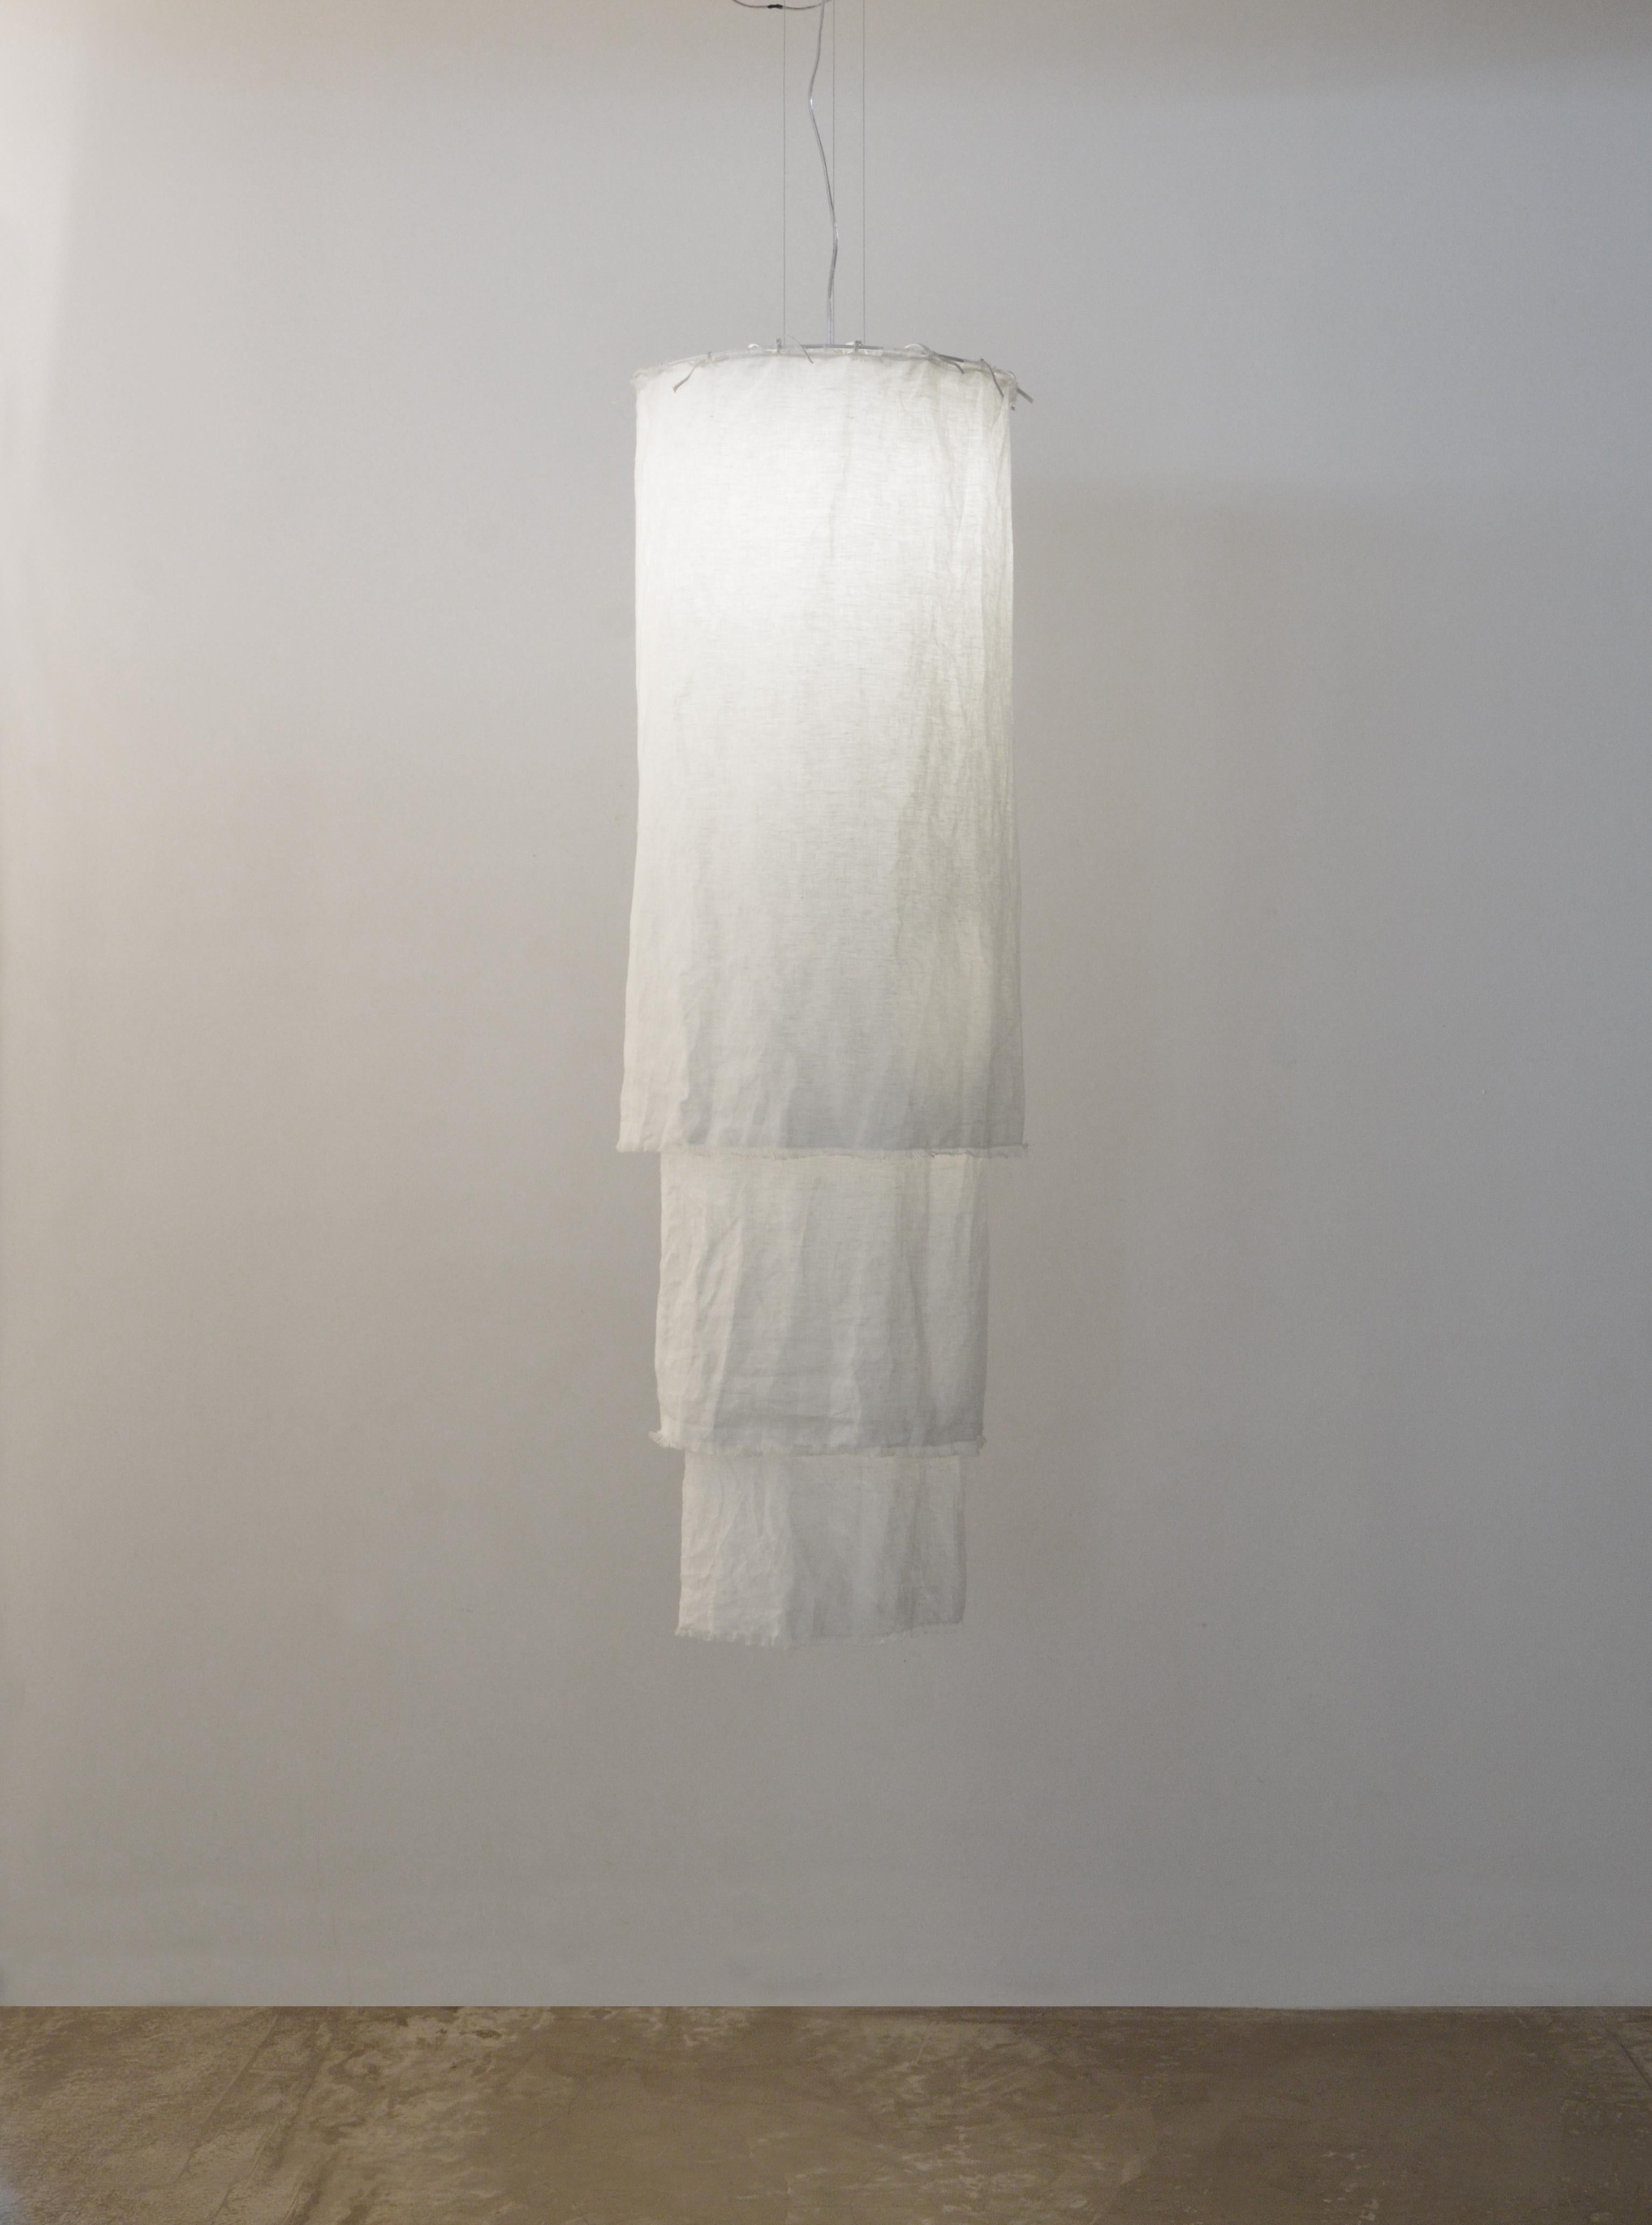 This pendant is named Acítara. 
It has three layers, one longer than the other, and it is made in prewashed white linen. The structure of the product is made of white alumnium. 
The linen can me dry cleaned, because it is prewashed. 
It has 40cm of